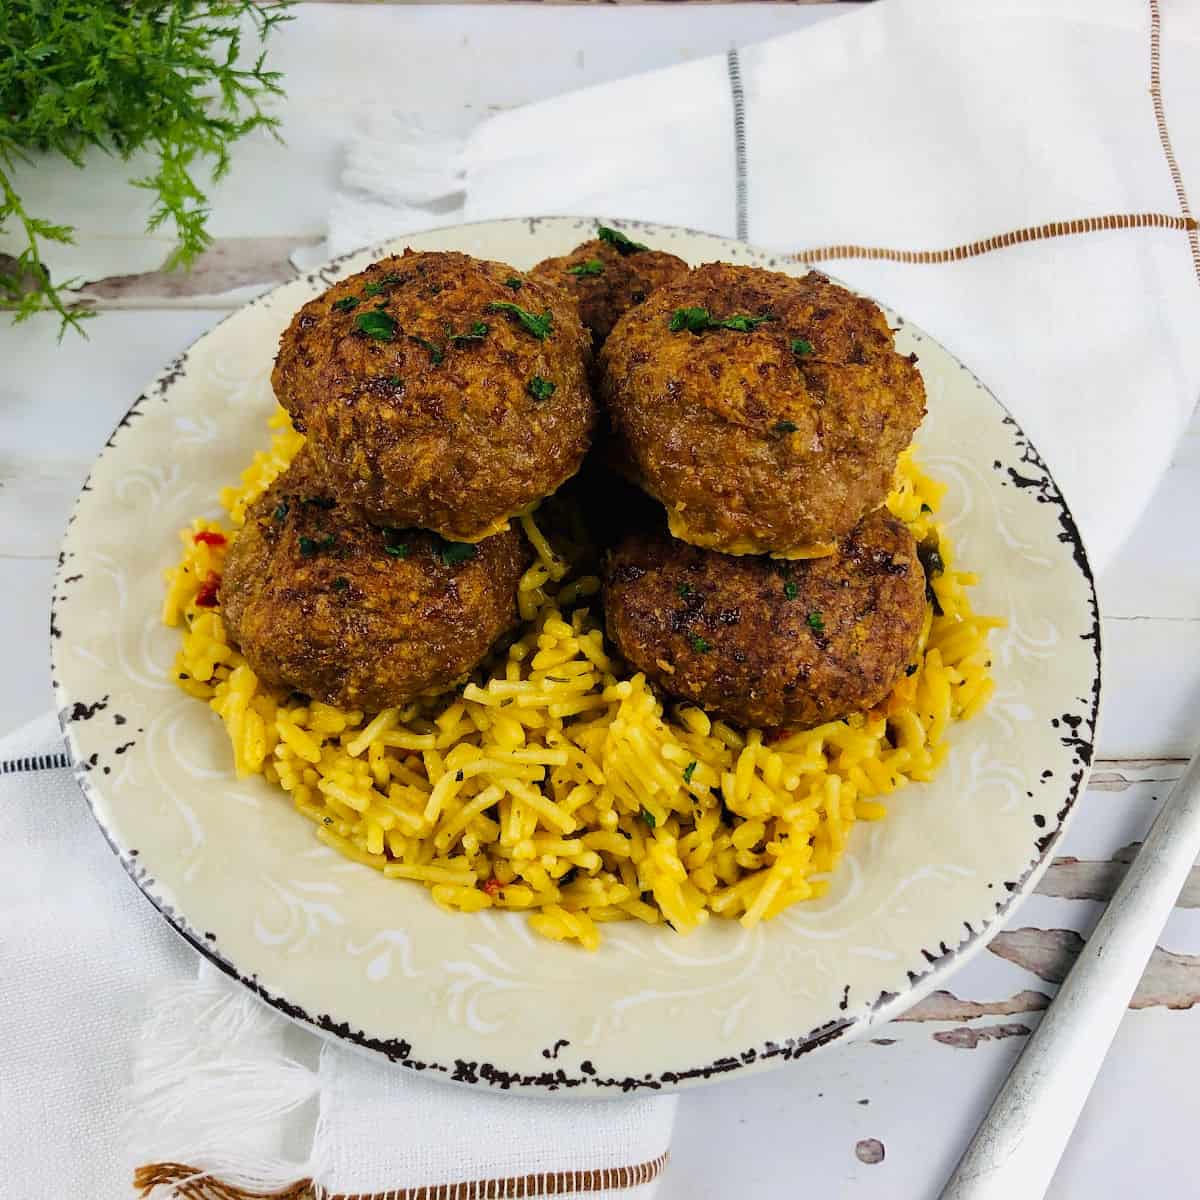 Meatballs on top of rice on a white plate.